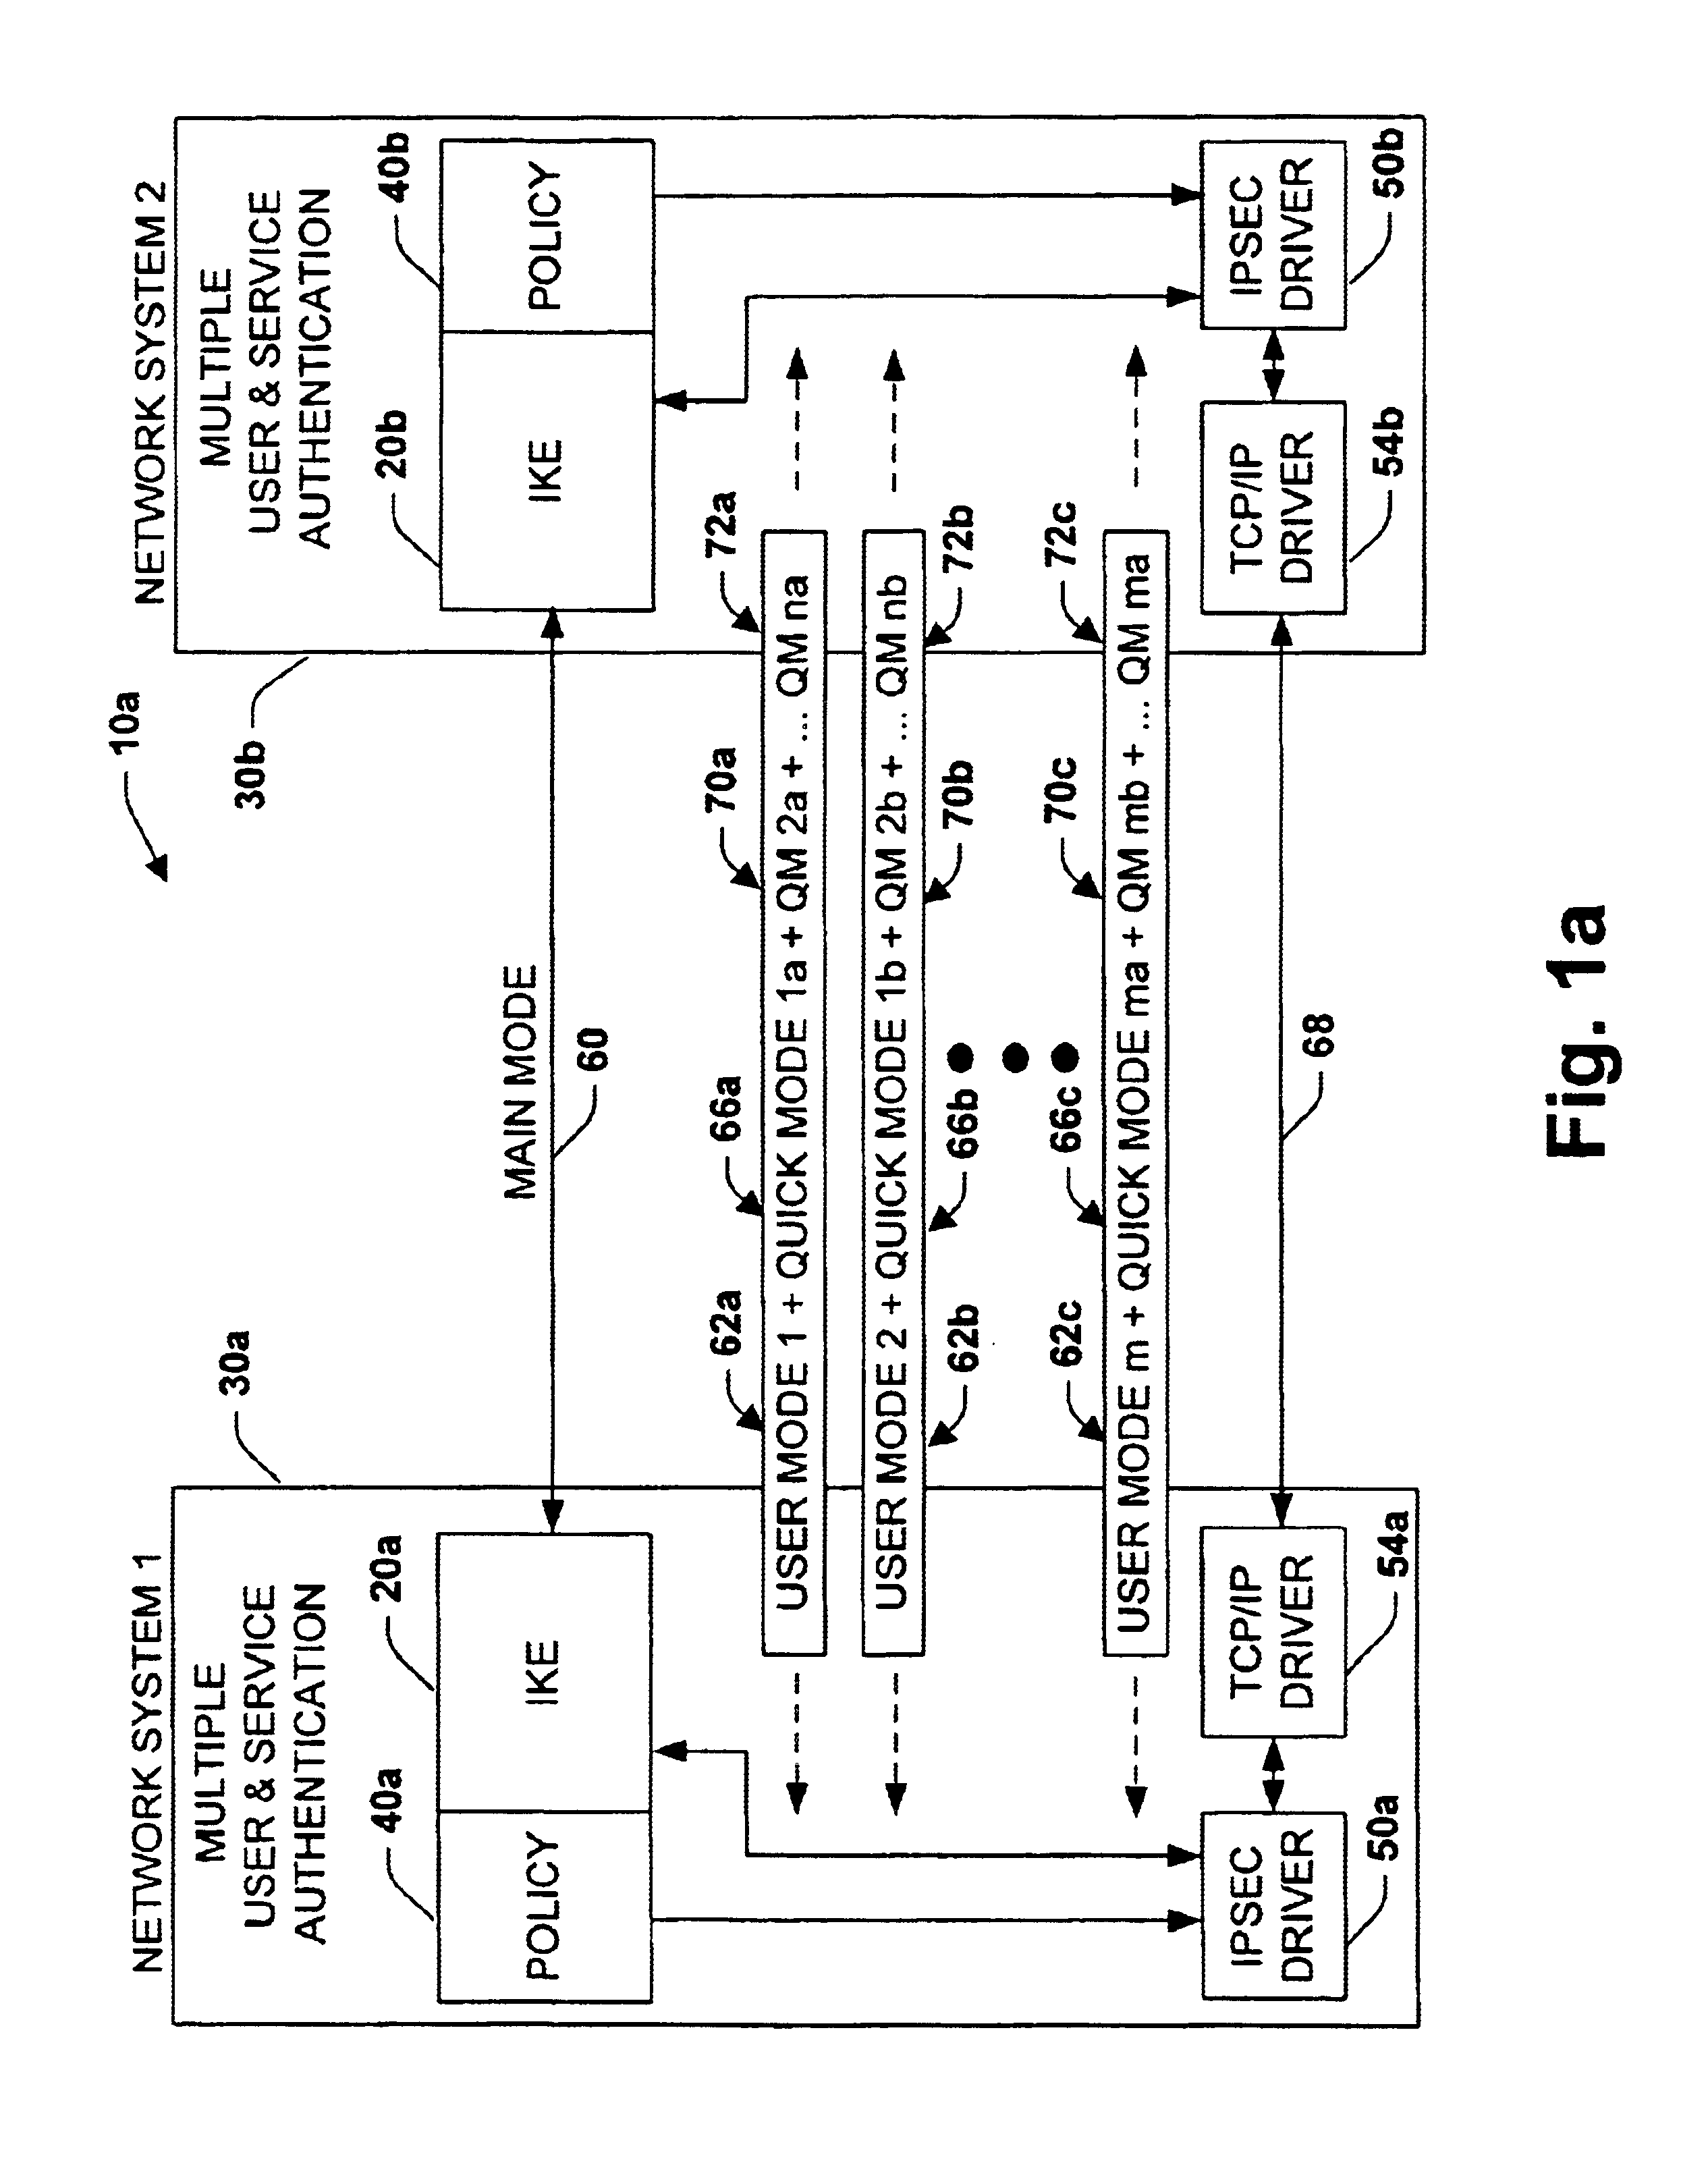 System and method for improved network security